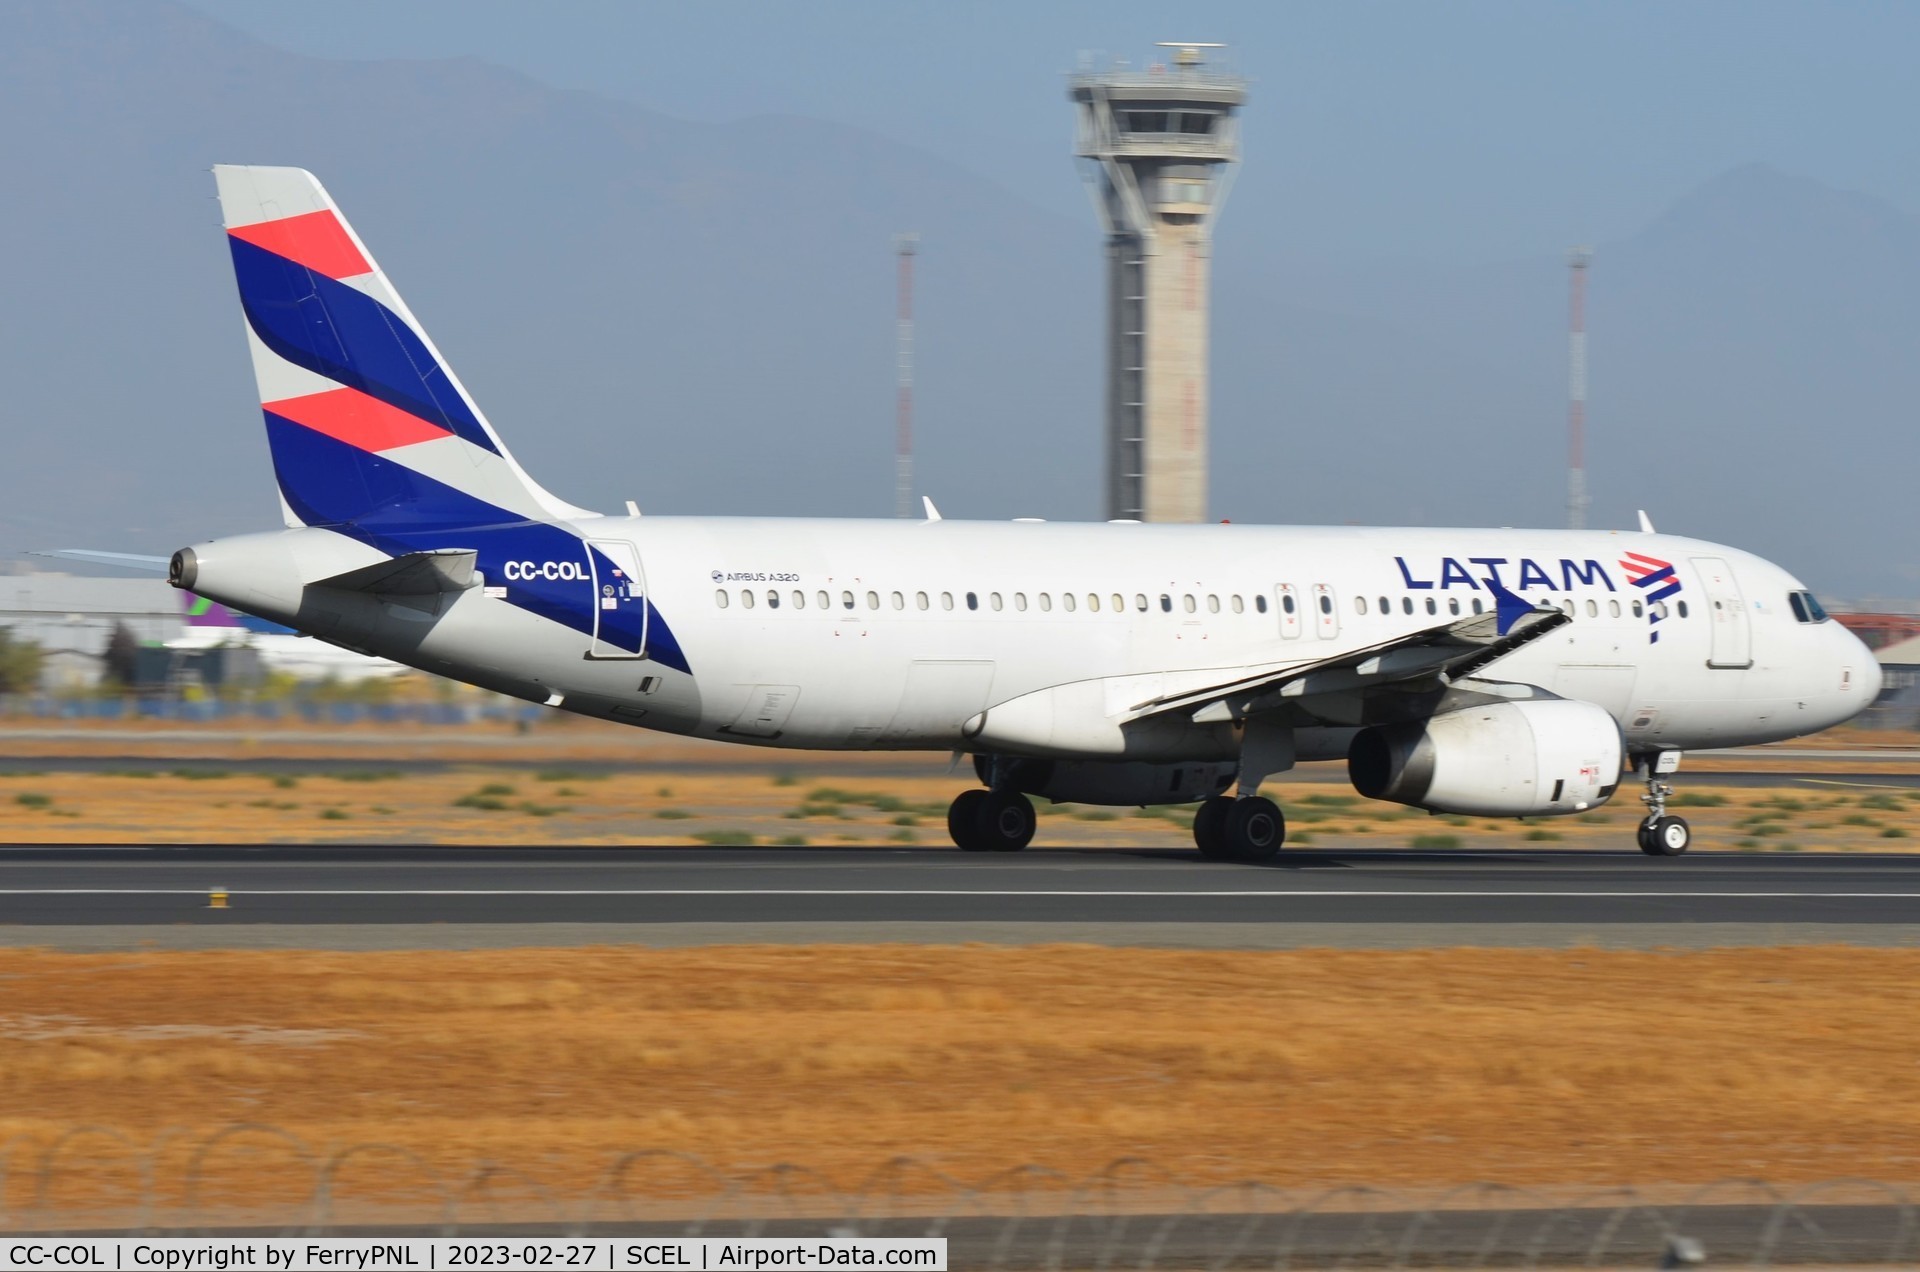 CC-COL, 2001 Airbus A320-233 C/N 1568, Departure of Latam A320